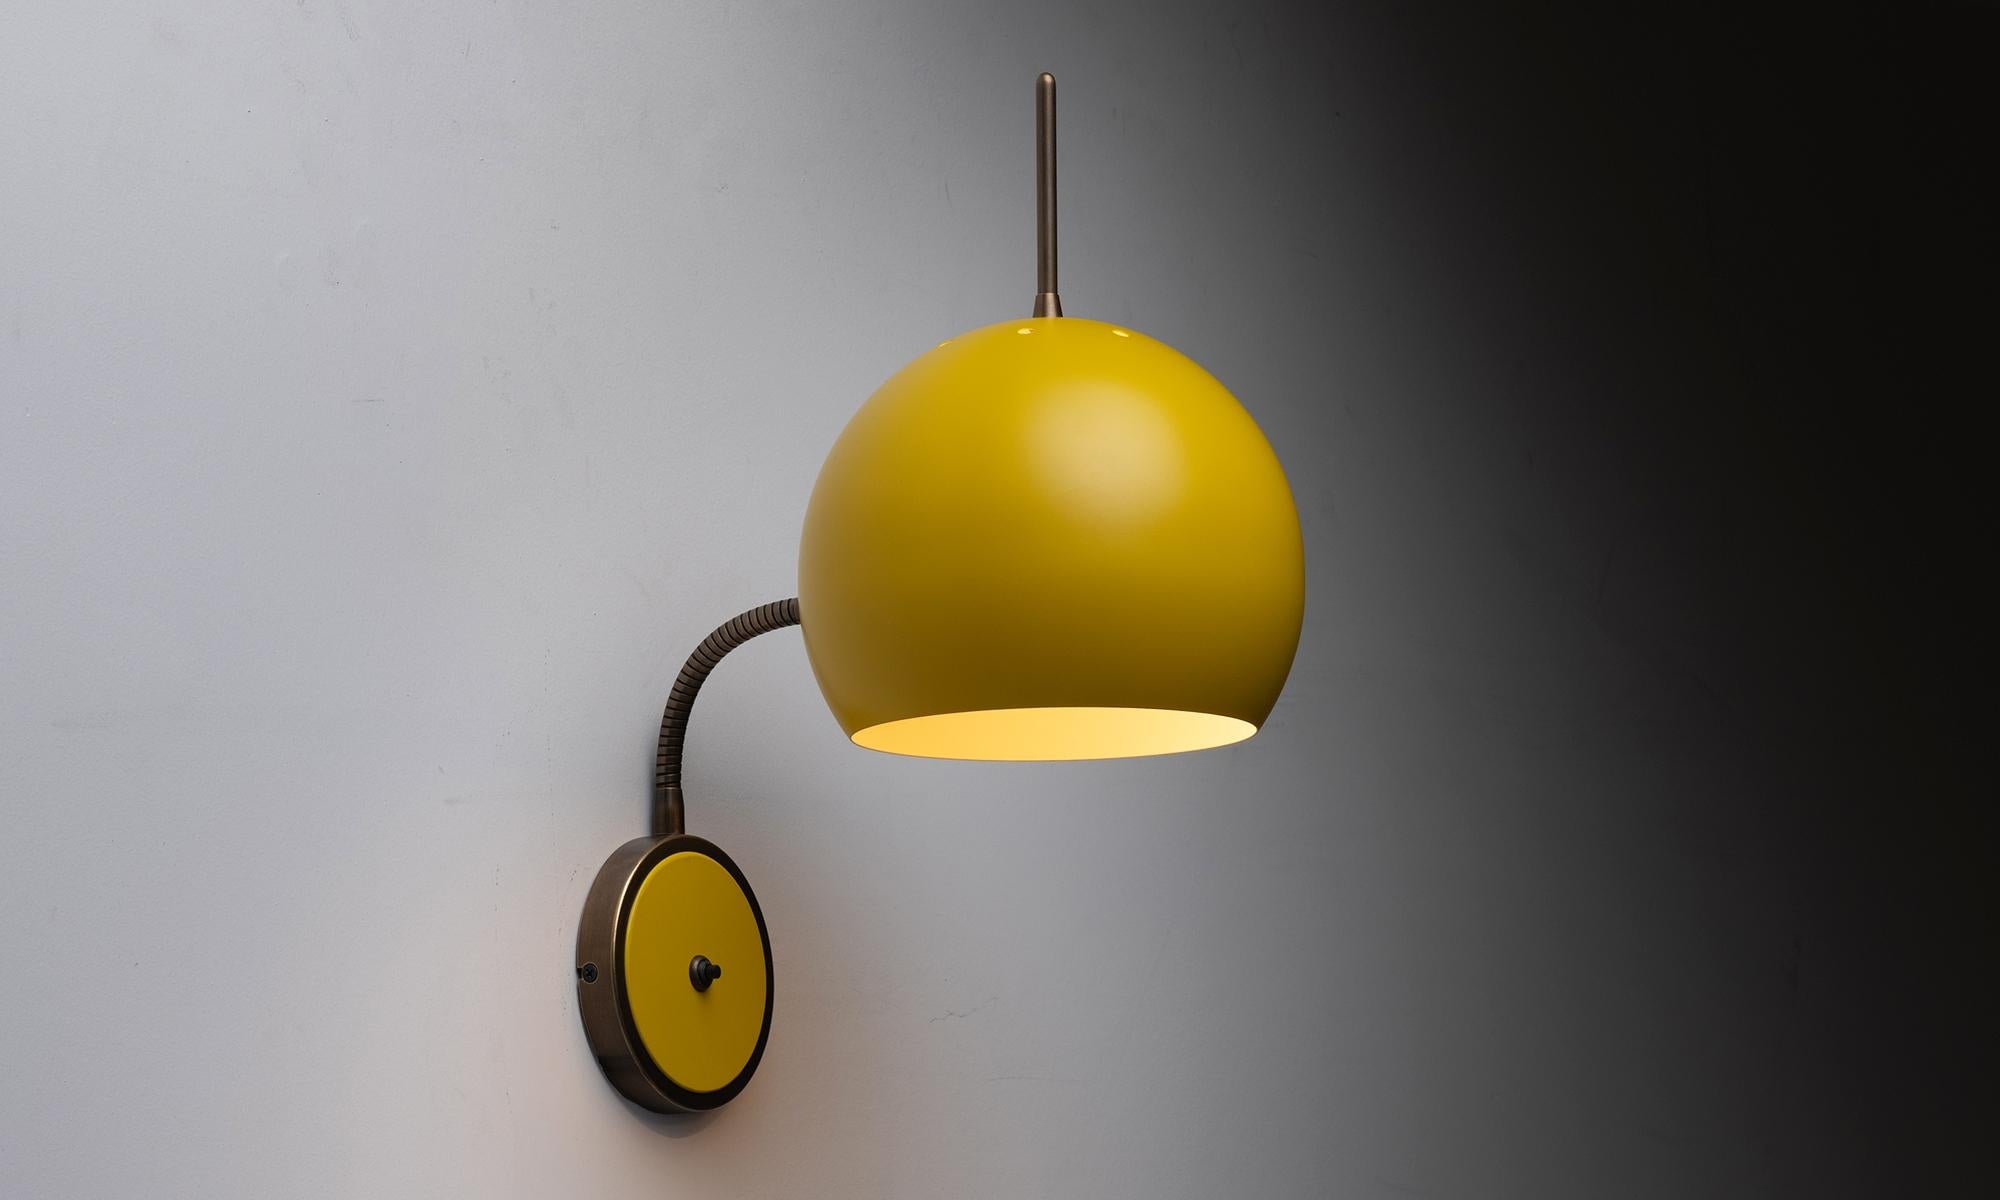 Made in Italy

Wall sconce with yellow painted metal shade and backplate. Adjustable brass arm.

9”w x 12”d x 15”h

*Please Note: This fixture is made in Italy, and comes newly wired (eu wiring). It is not UL Listed. Standard Lead Time is 4-6 Weeks*